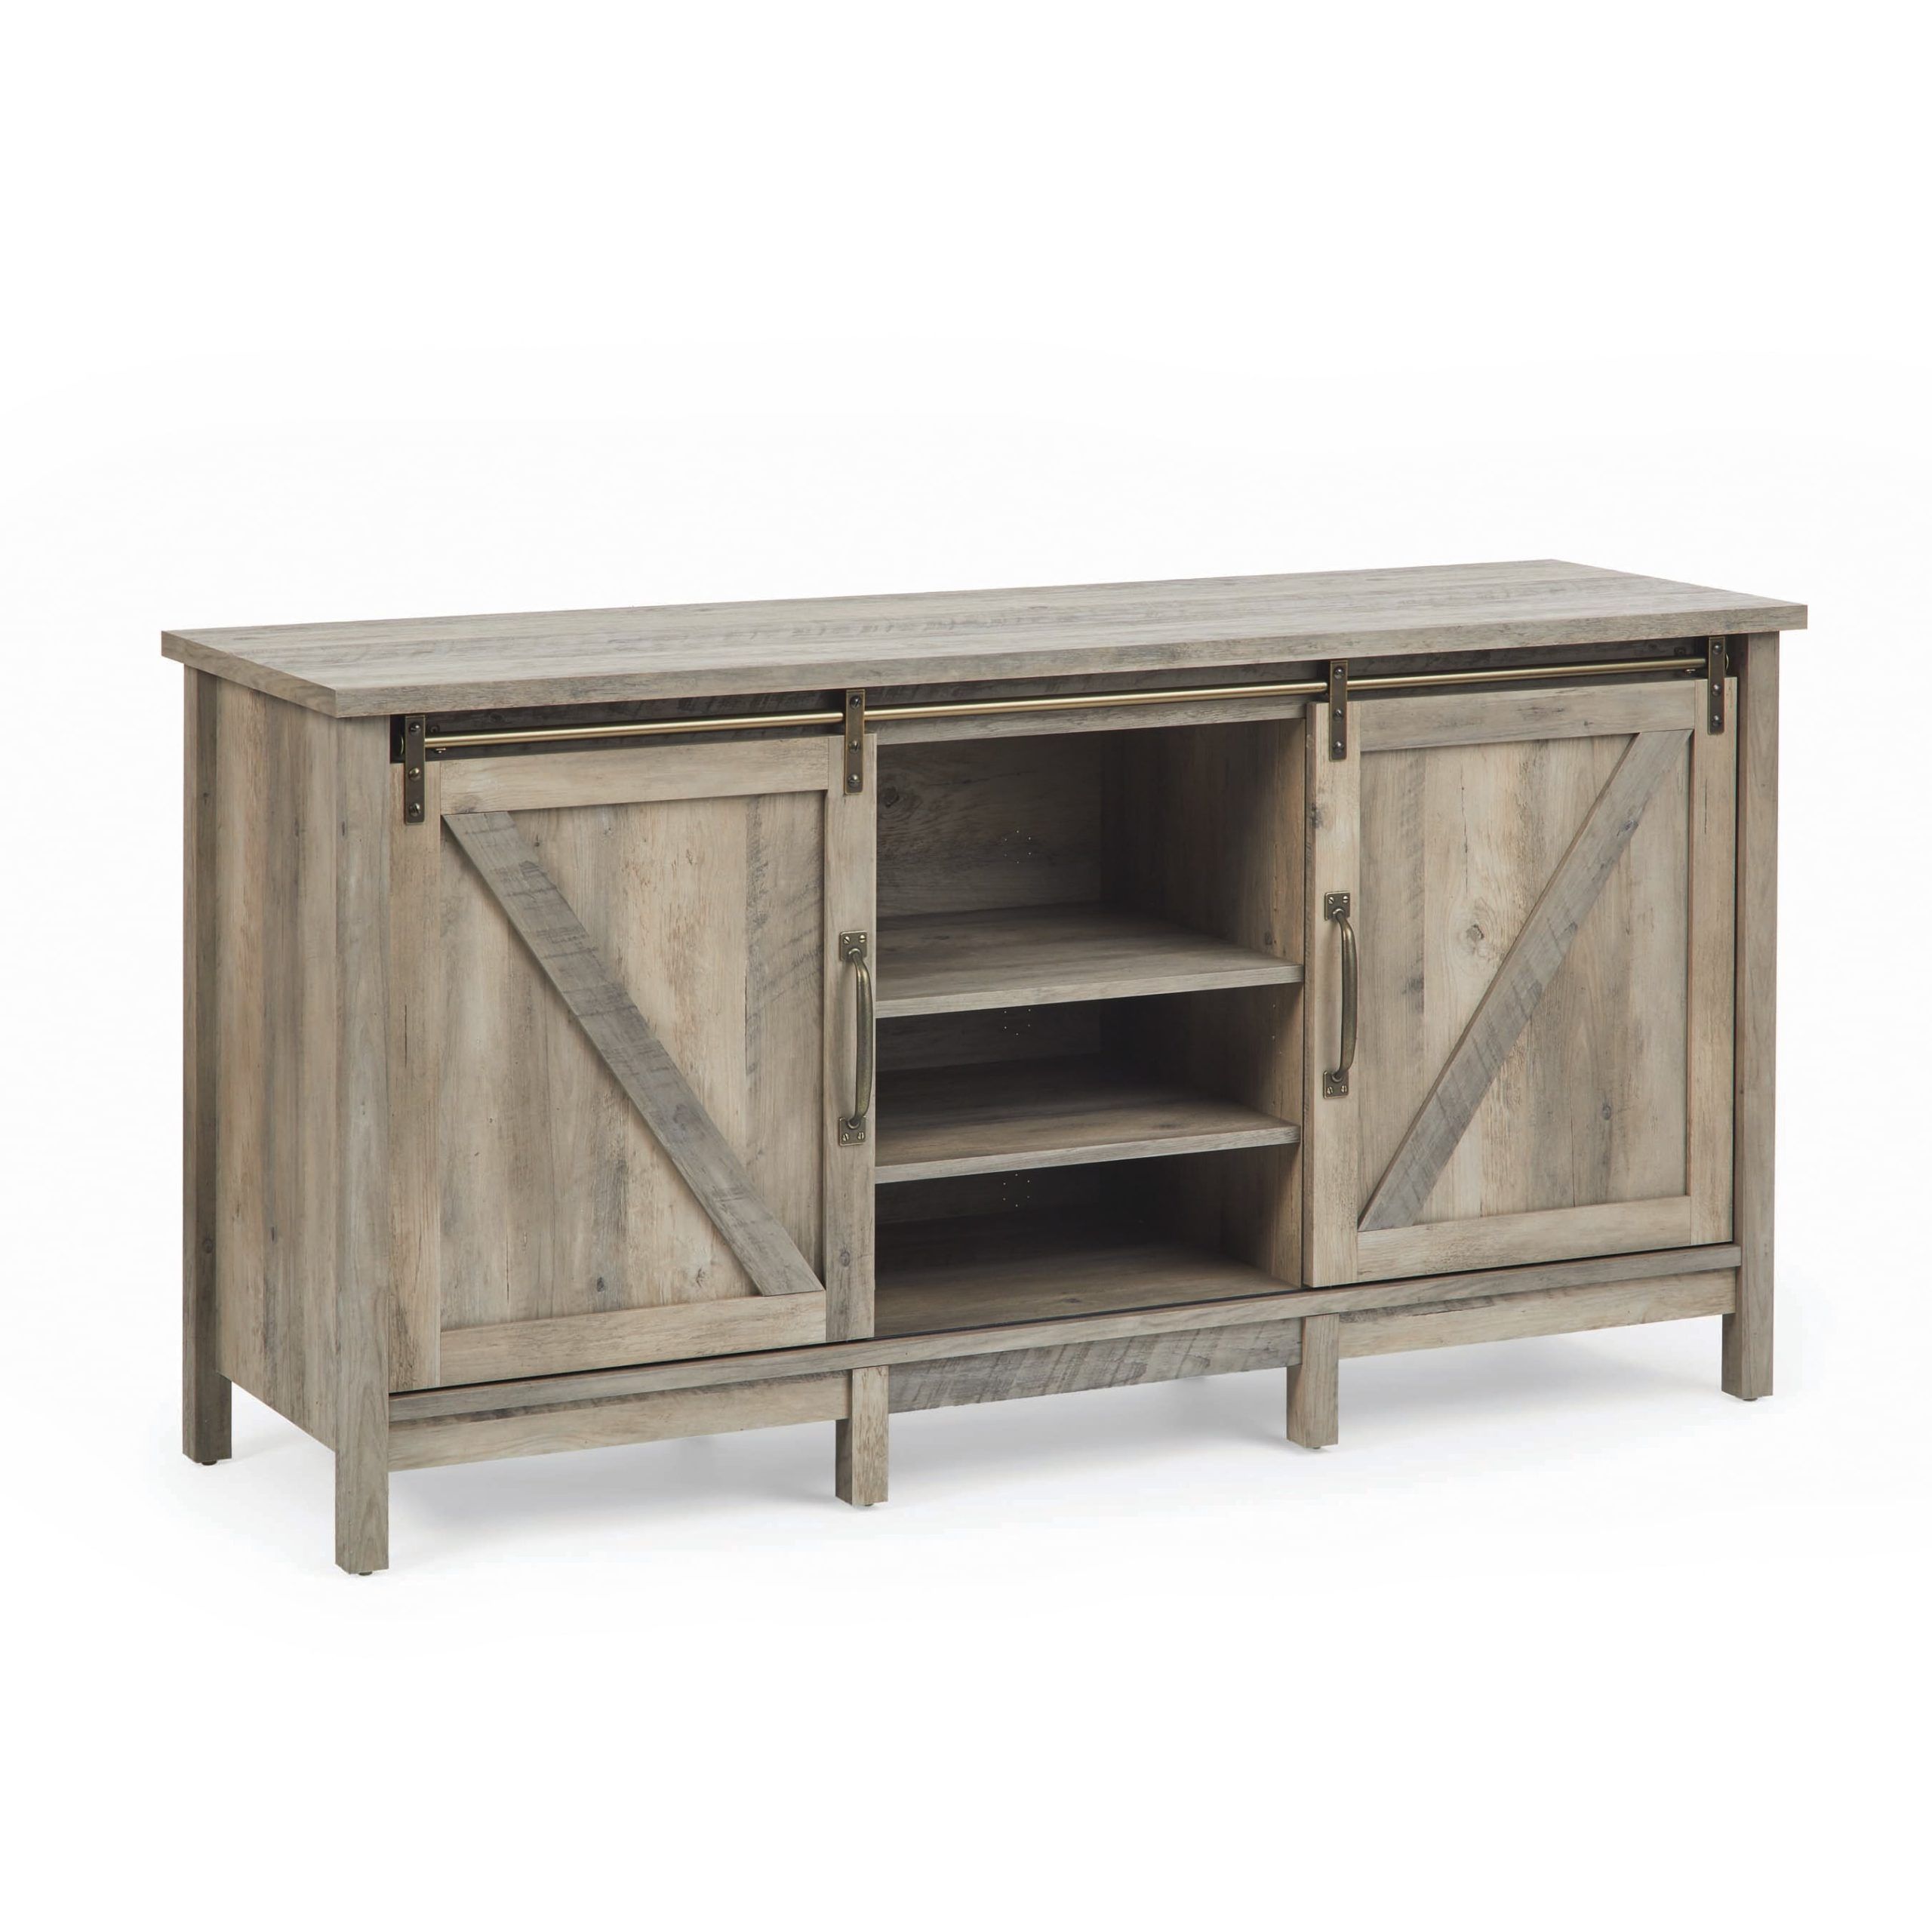 Better Homes & Gardens Modern Farmhouse Tv Stand For Tvs Up To 70 With Regard To Farmhouse Tv Stands For 70 Inch Tv (View 18 of 20)